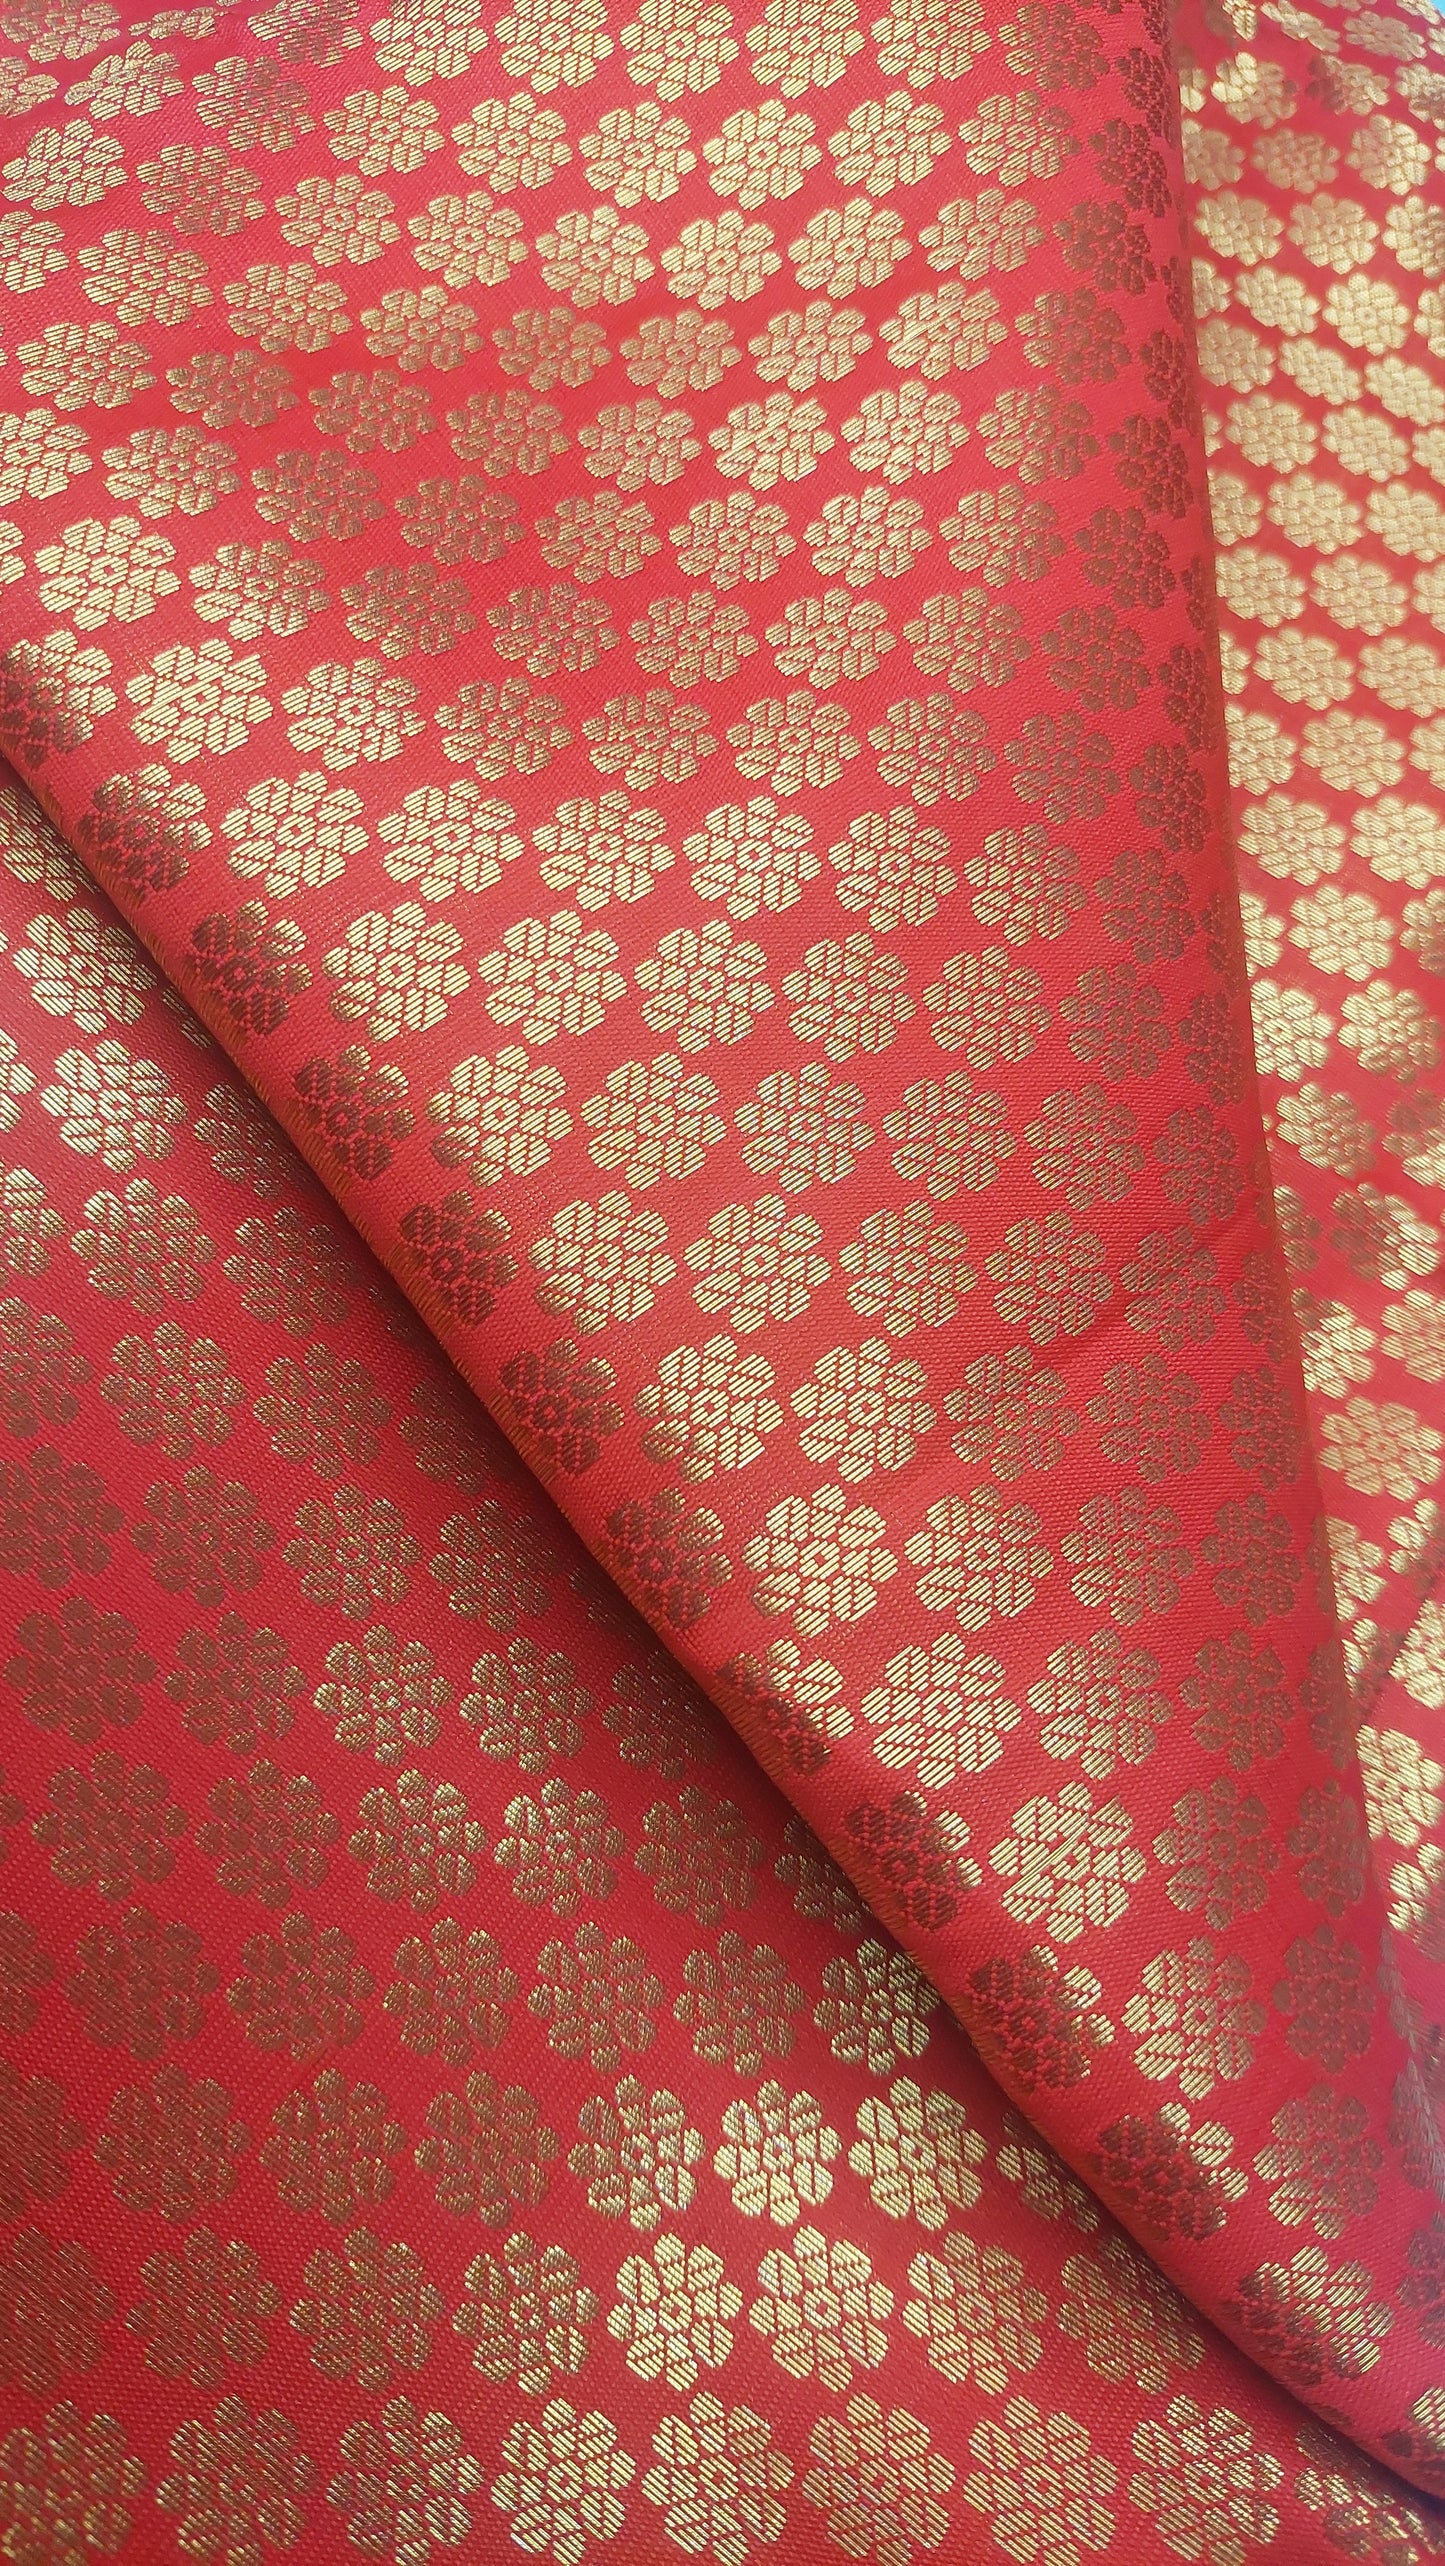 RED & GOLD BROCADE MATERIAL